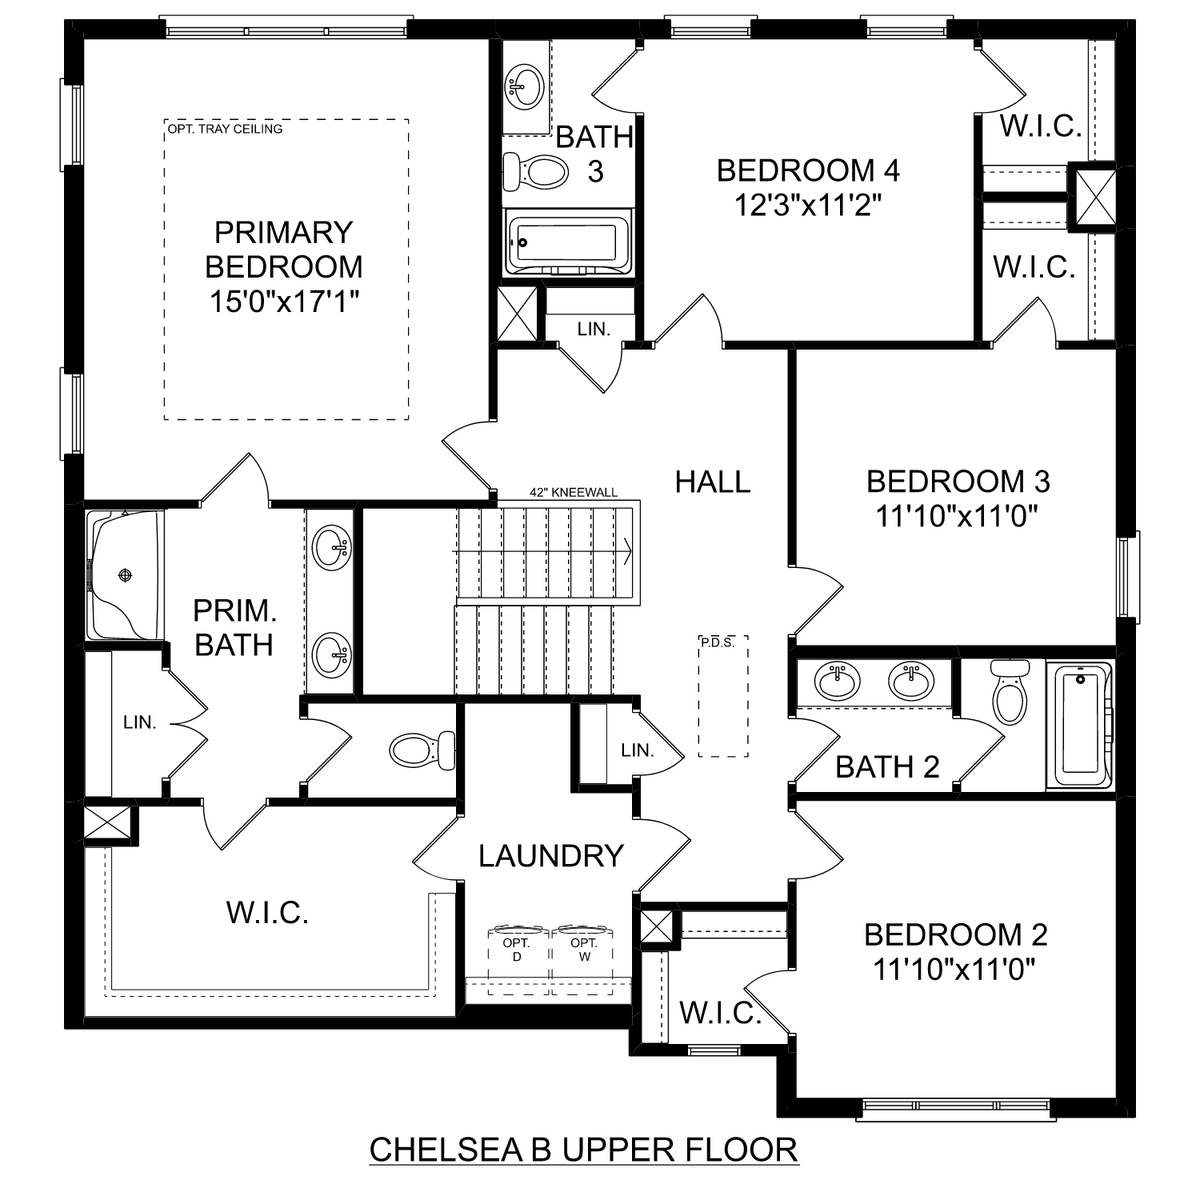 2 - The Chelsea B floor plan layout for 102 Shearwater Drive in Davidson Homes' Walker's Hill community.